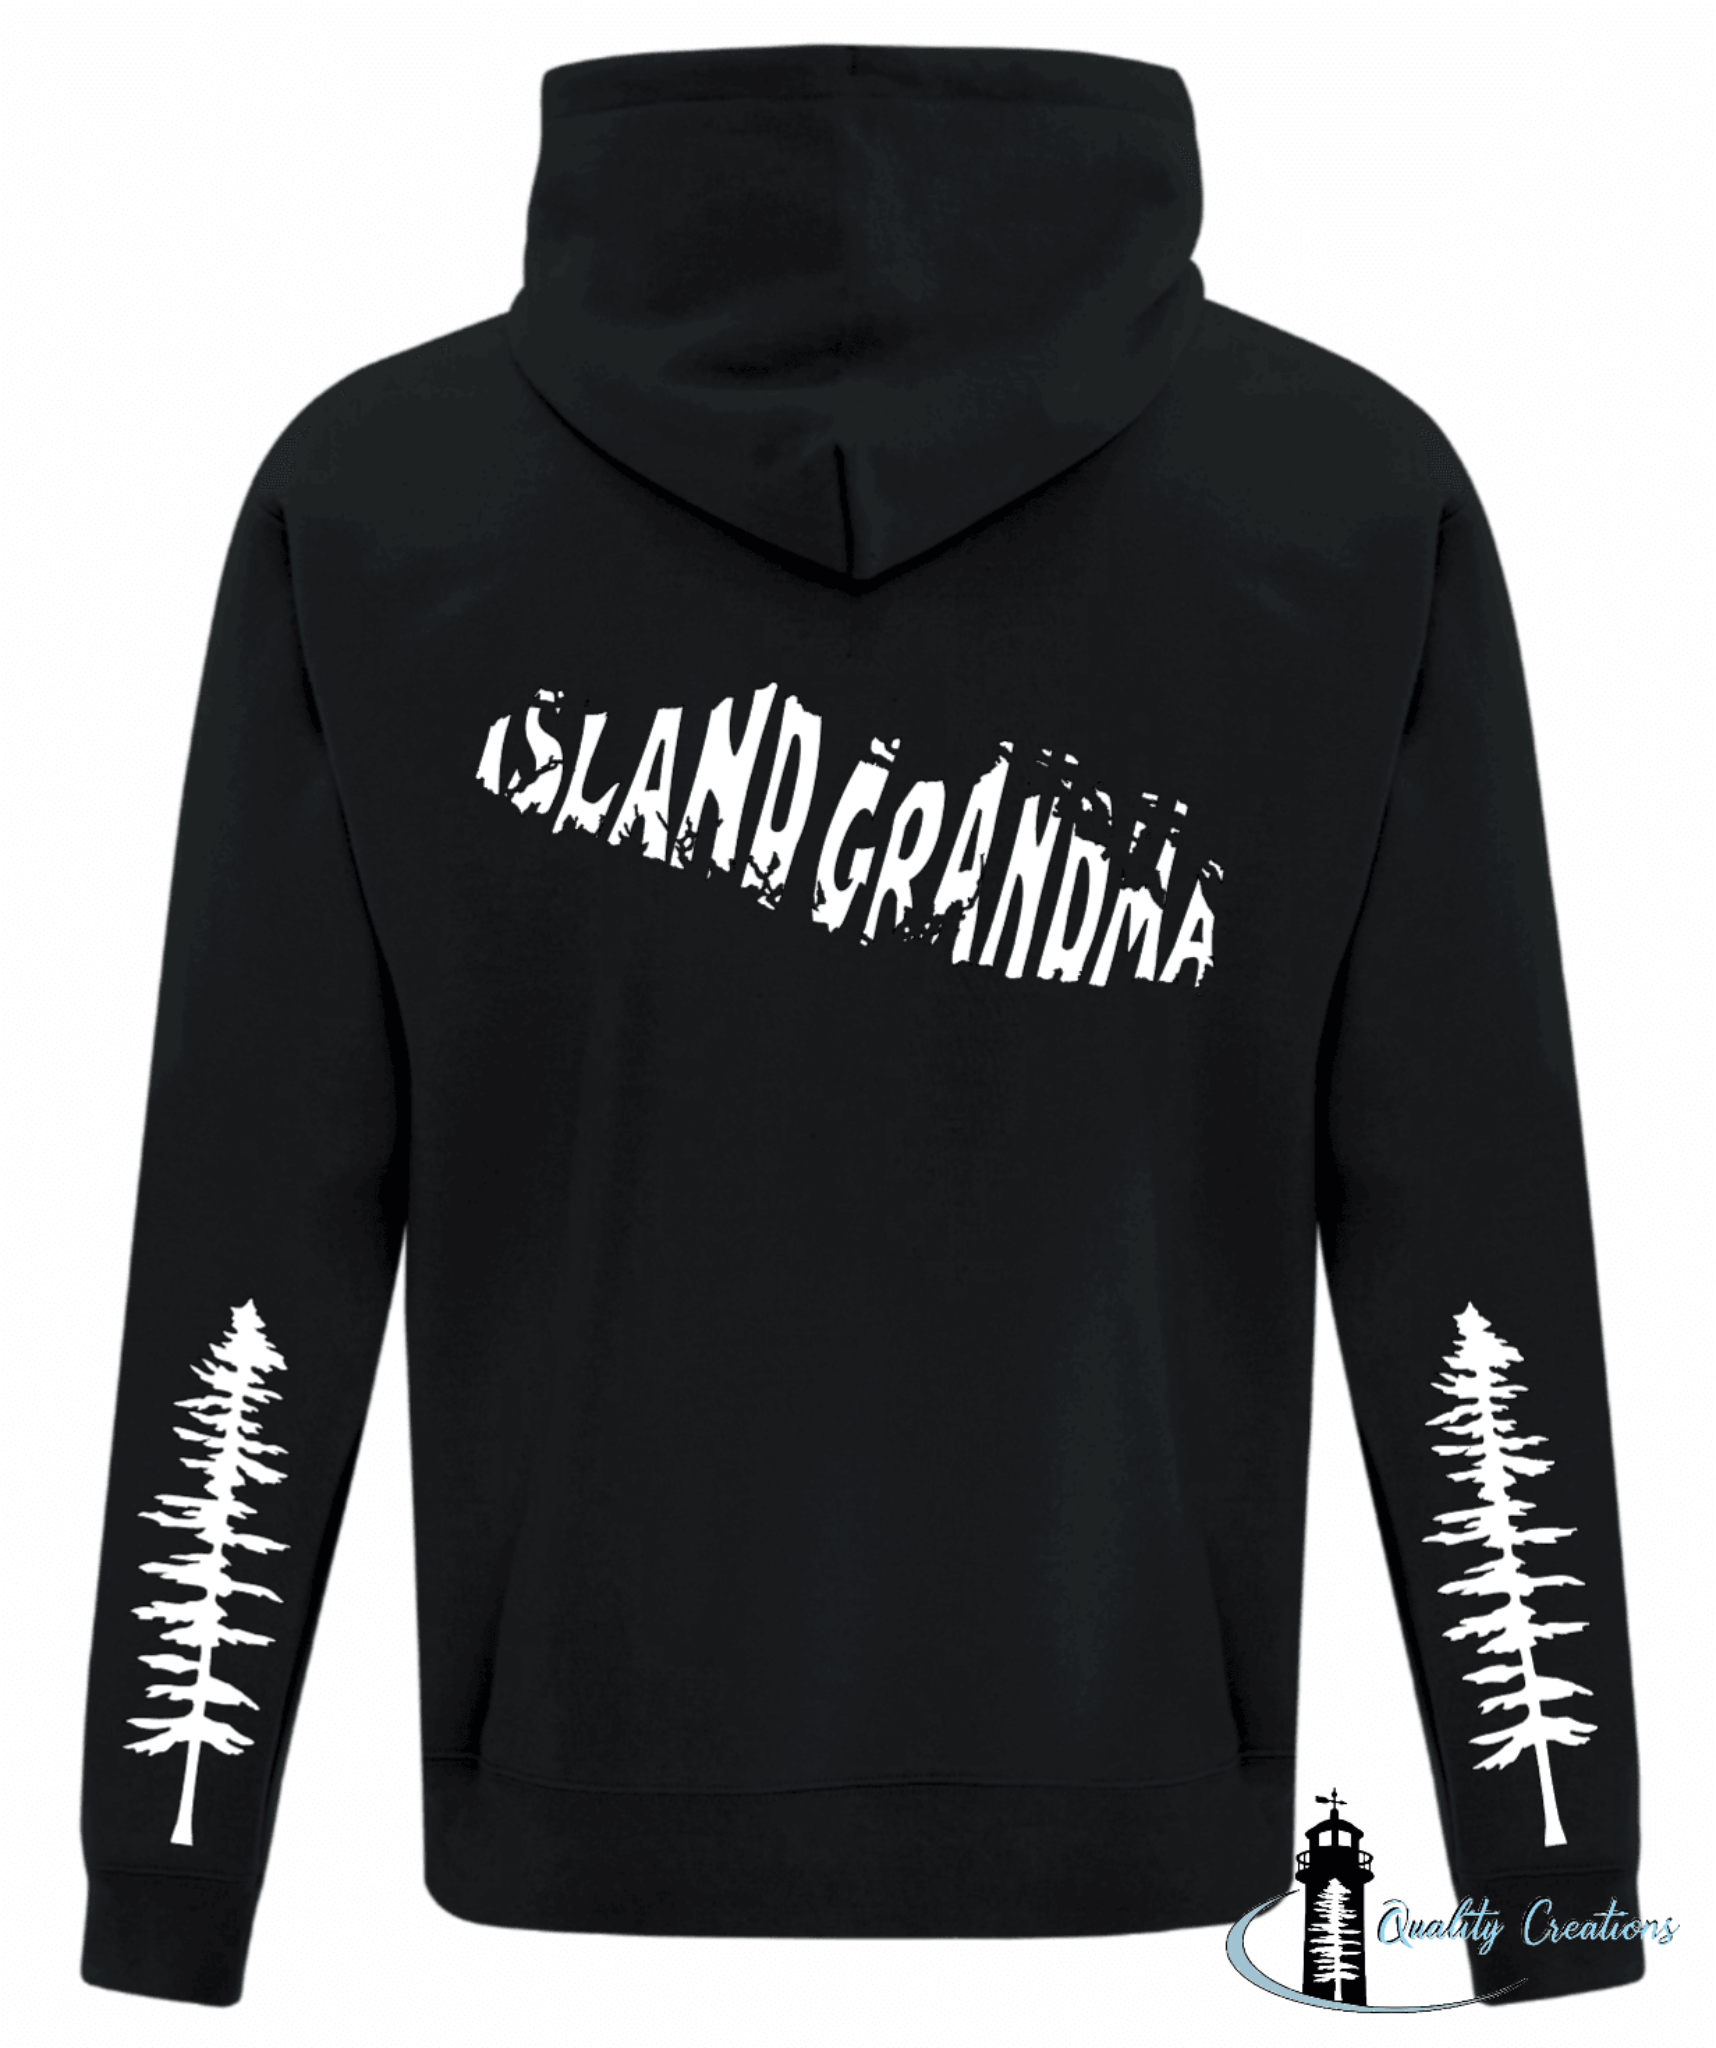 black hoodie white font Vancouver Island design on hoodie with sitka trees up arms quality creations Newbrunswick canada